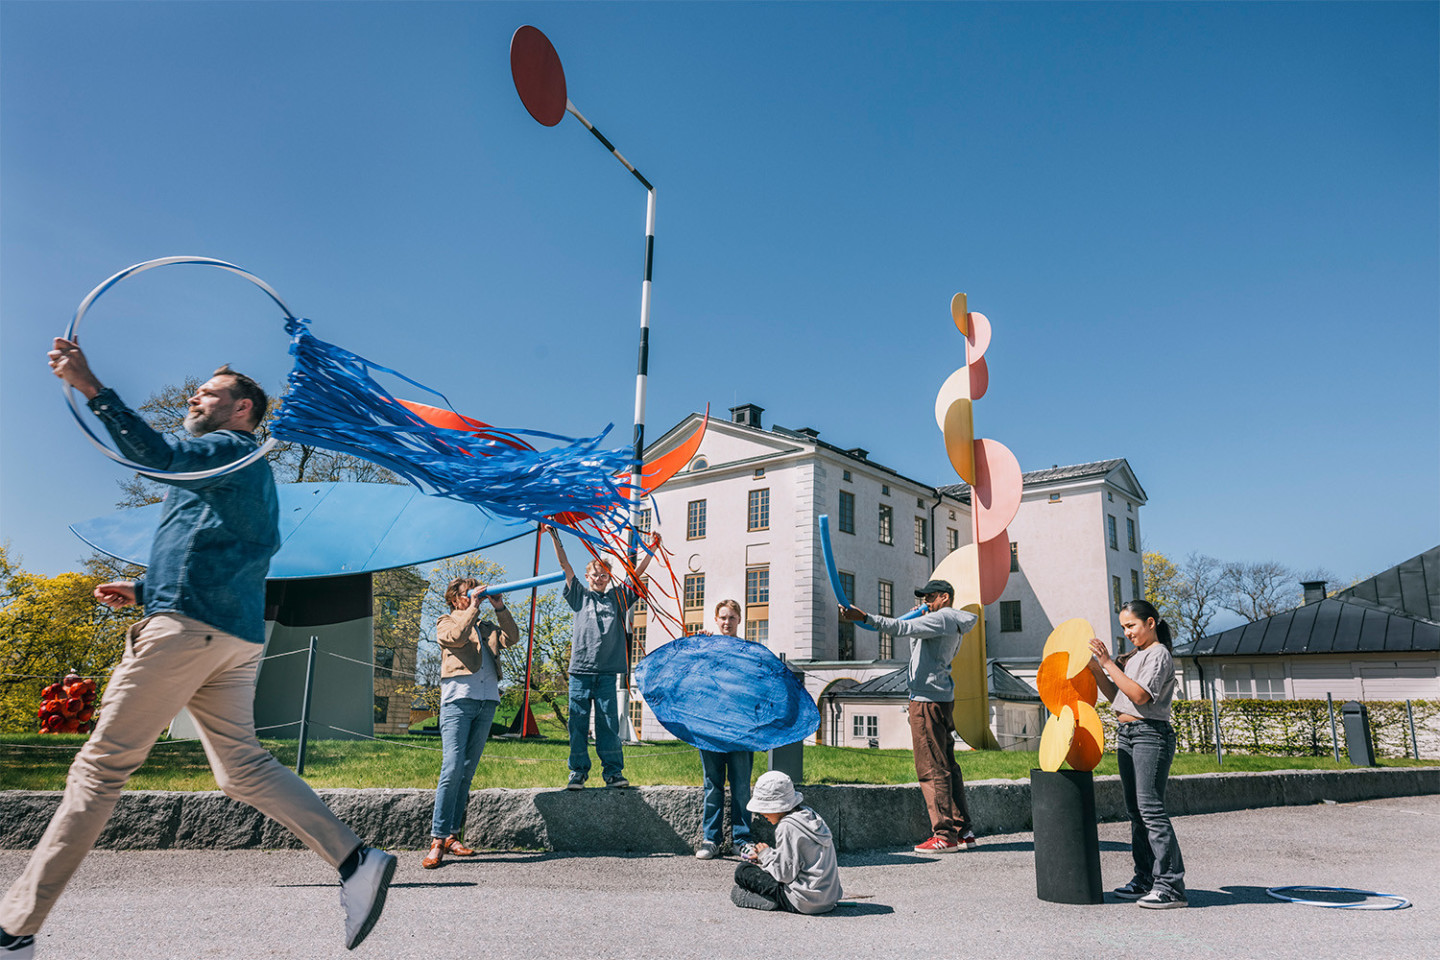 People play around the sculpture group "The Four Elements" by Alexander Calder, outside the Moderna Museet's entrance